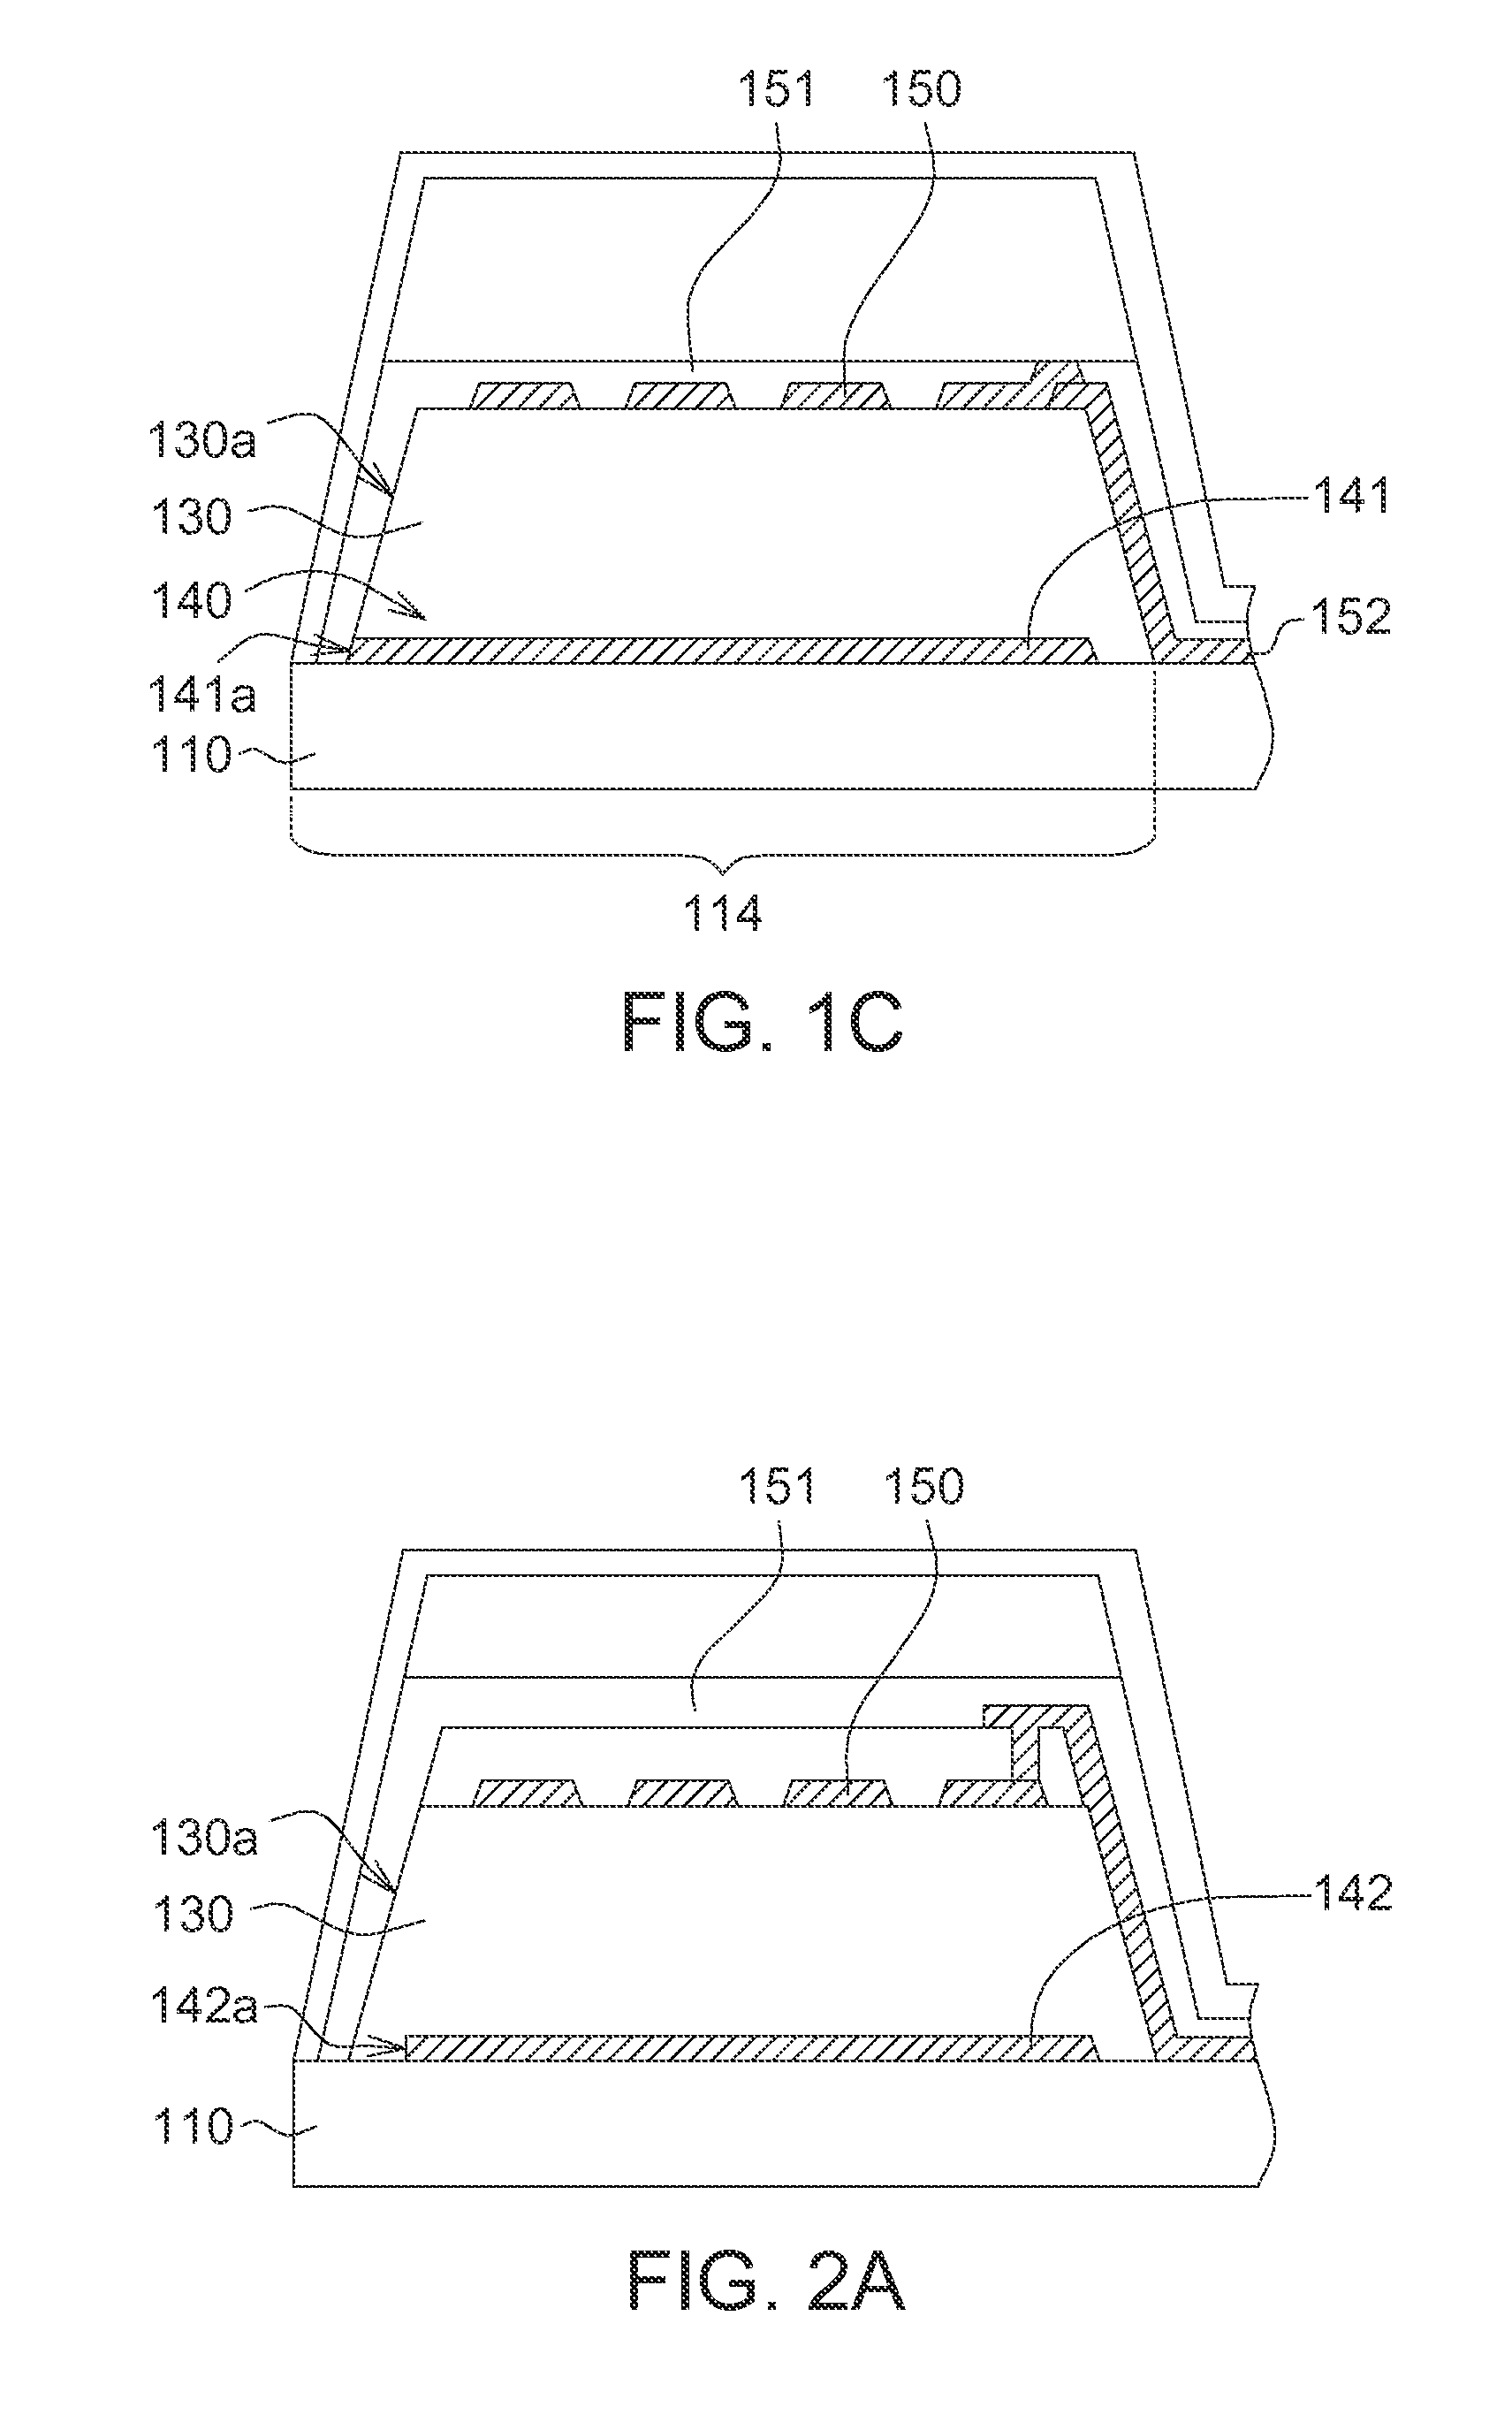 Touch panel having electrostatic protection structure